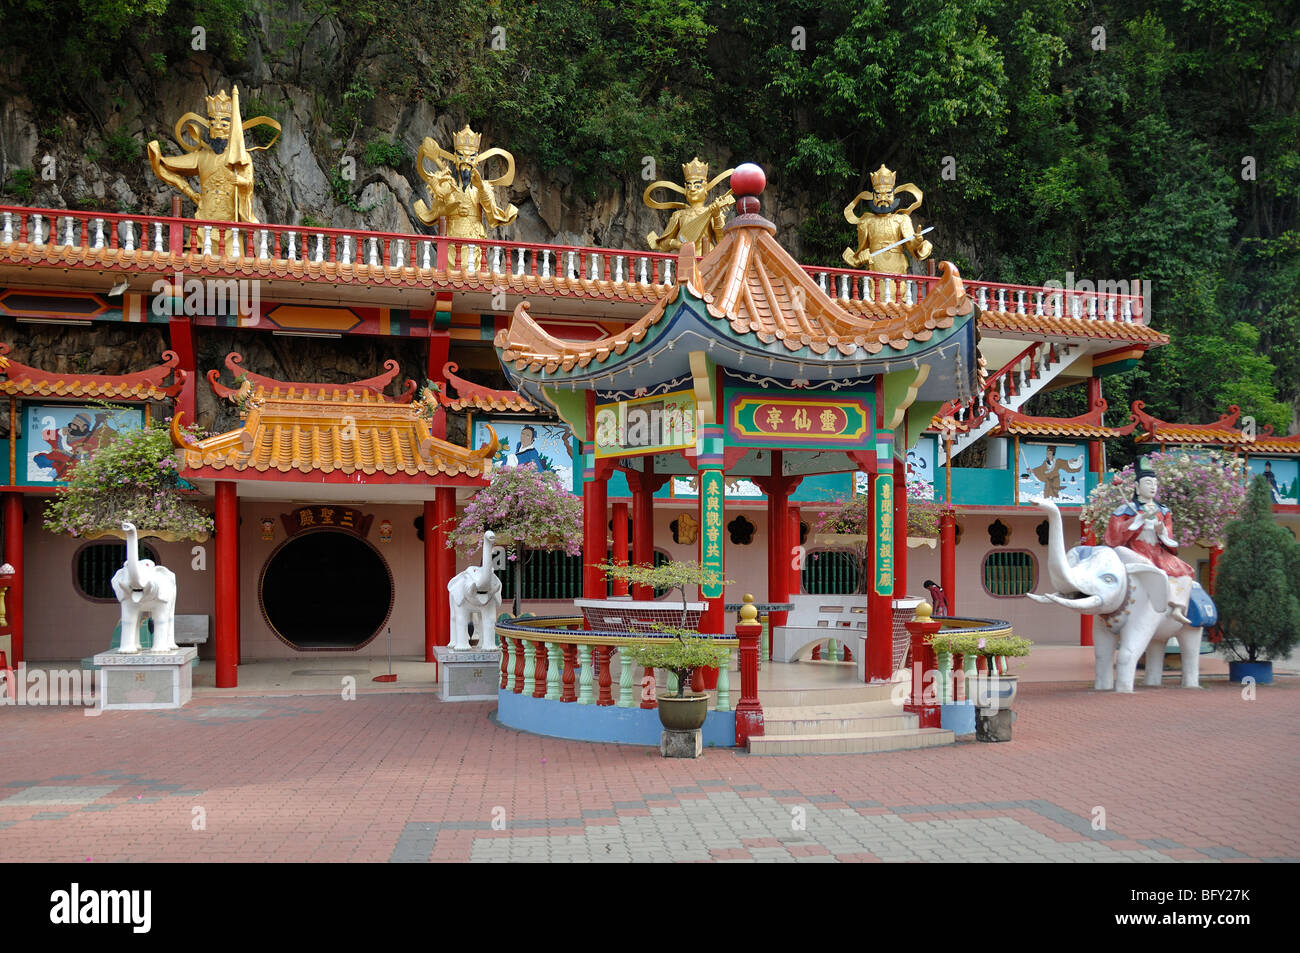 Colourful Chinese Garden Kiosk Inside the Courtyard of the Ling Sen Tong Chinese Tao or Taoist Cave Temple, Ipoh, Perak, Malaysia Stock Photo